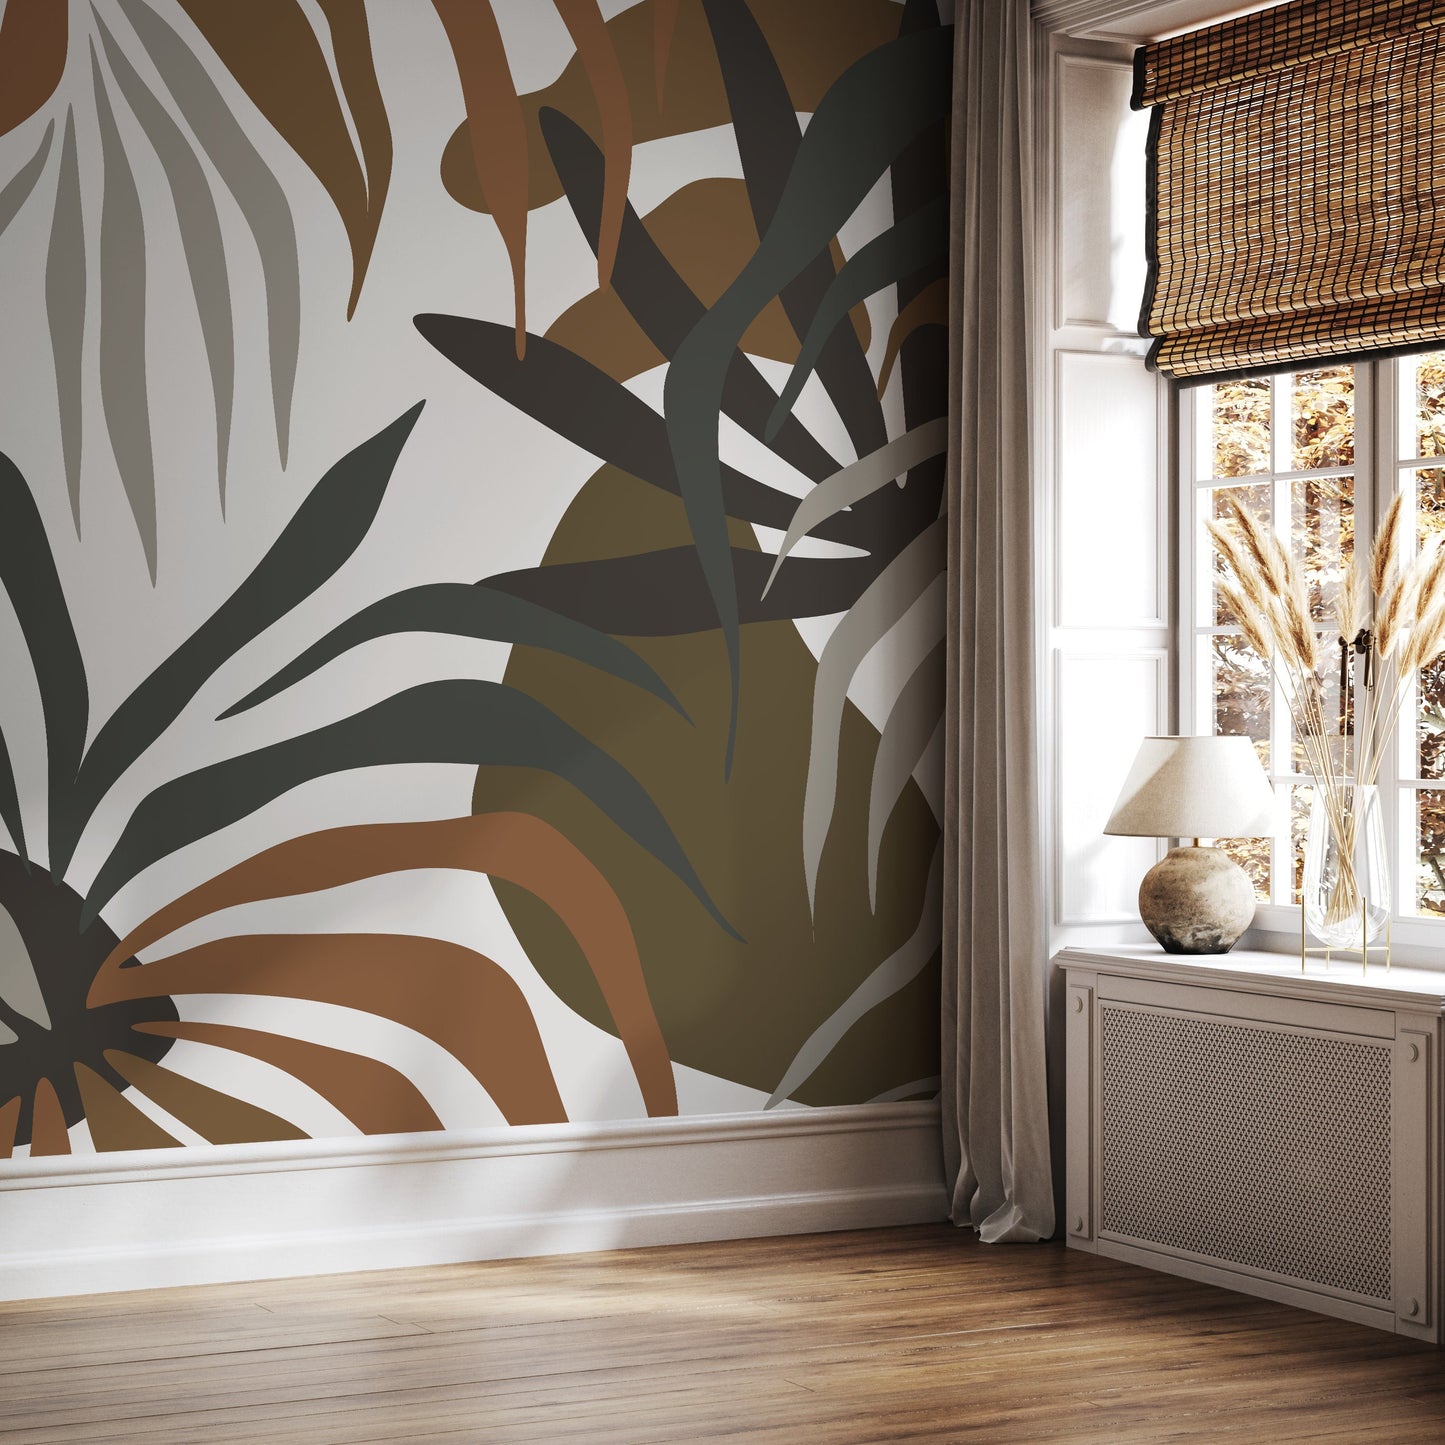 Tropical Leaves Mural Boho Wallpaper Peel and Stick and Traditional Wallpaper - D714